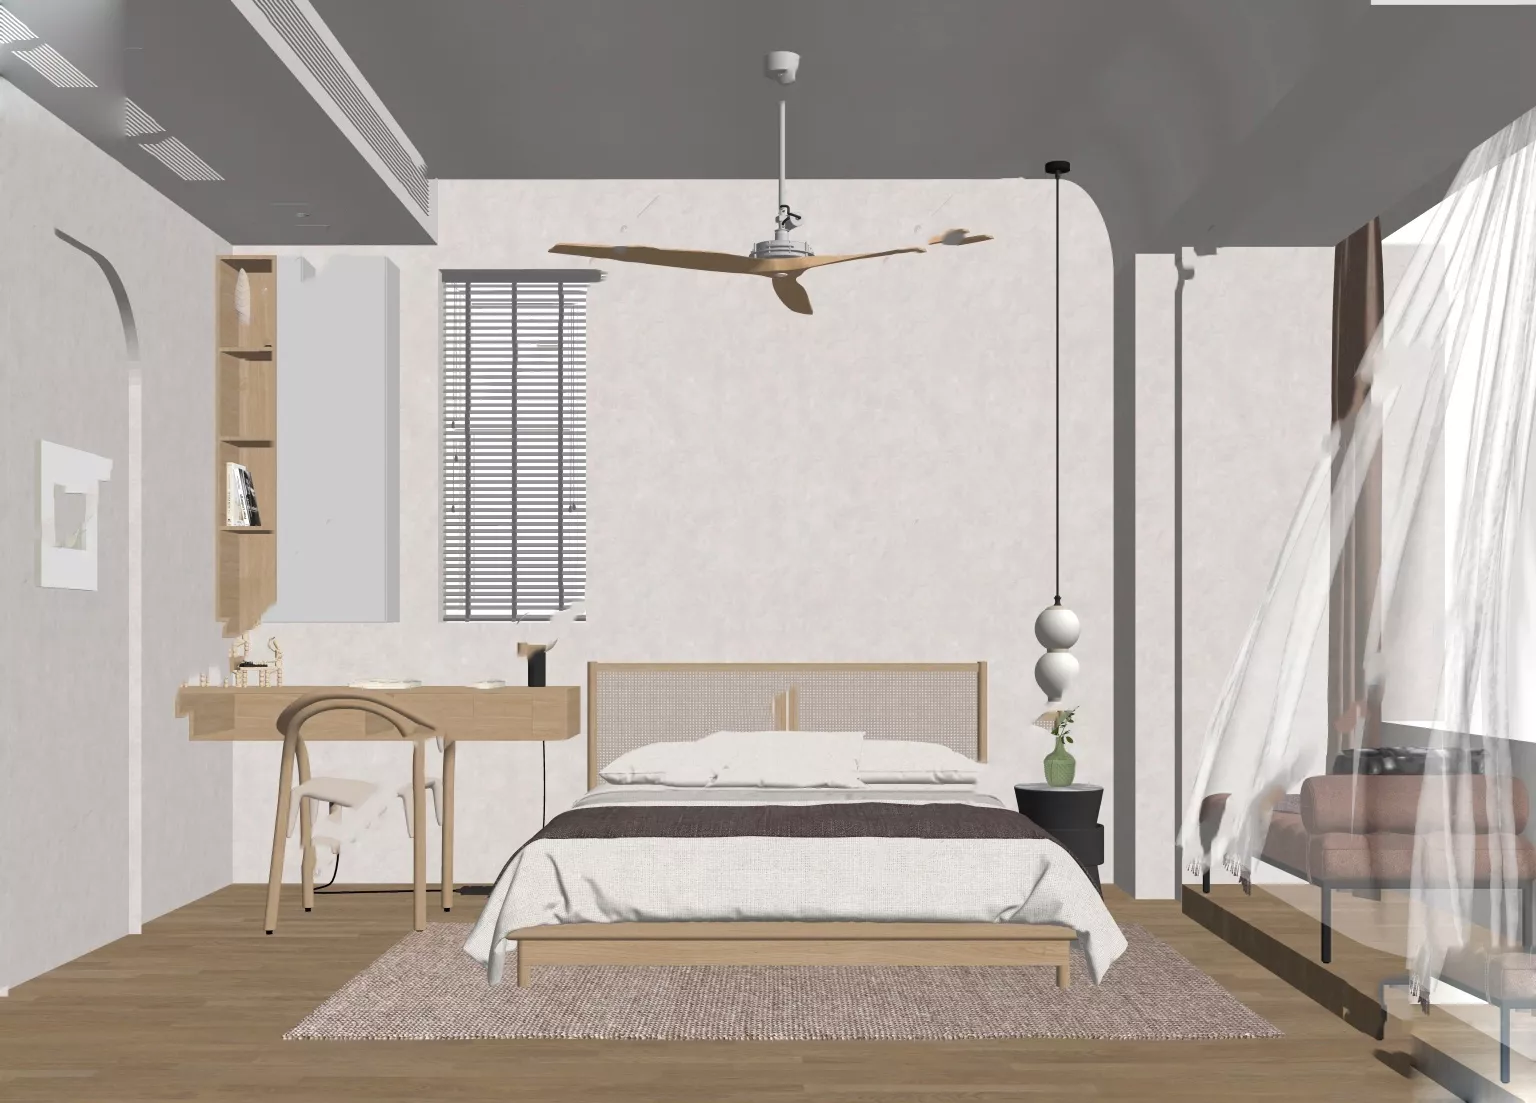 WABI SABI INTERIOR COLLECTION - SKETCHUP 3D SCENE - VRAY OR ENSCAPE - ID17886